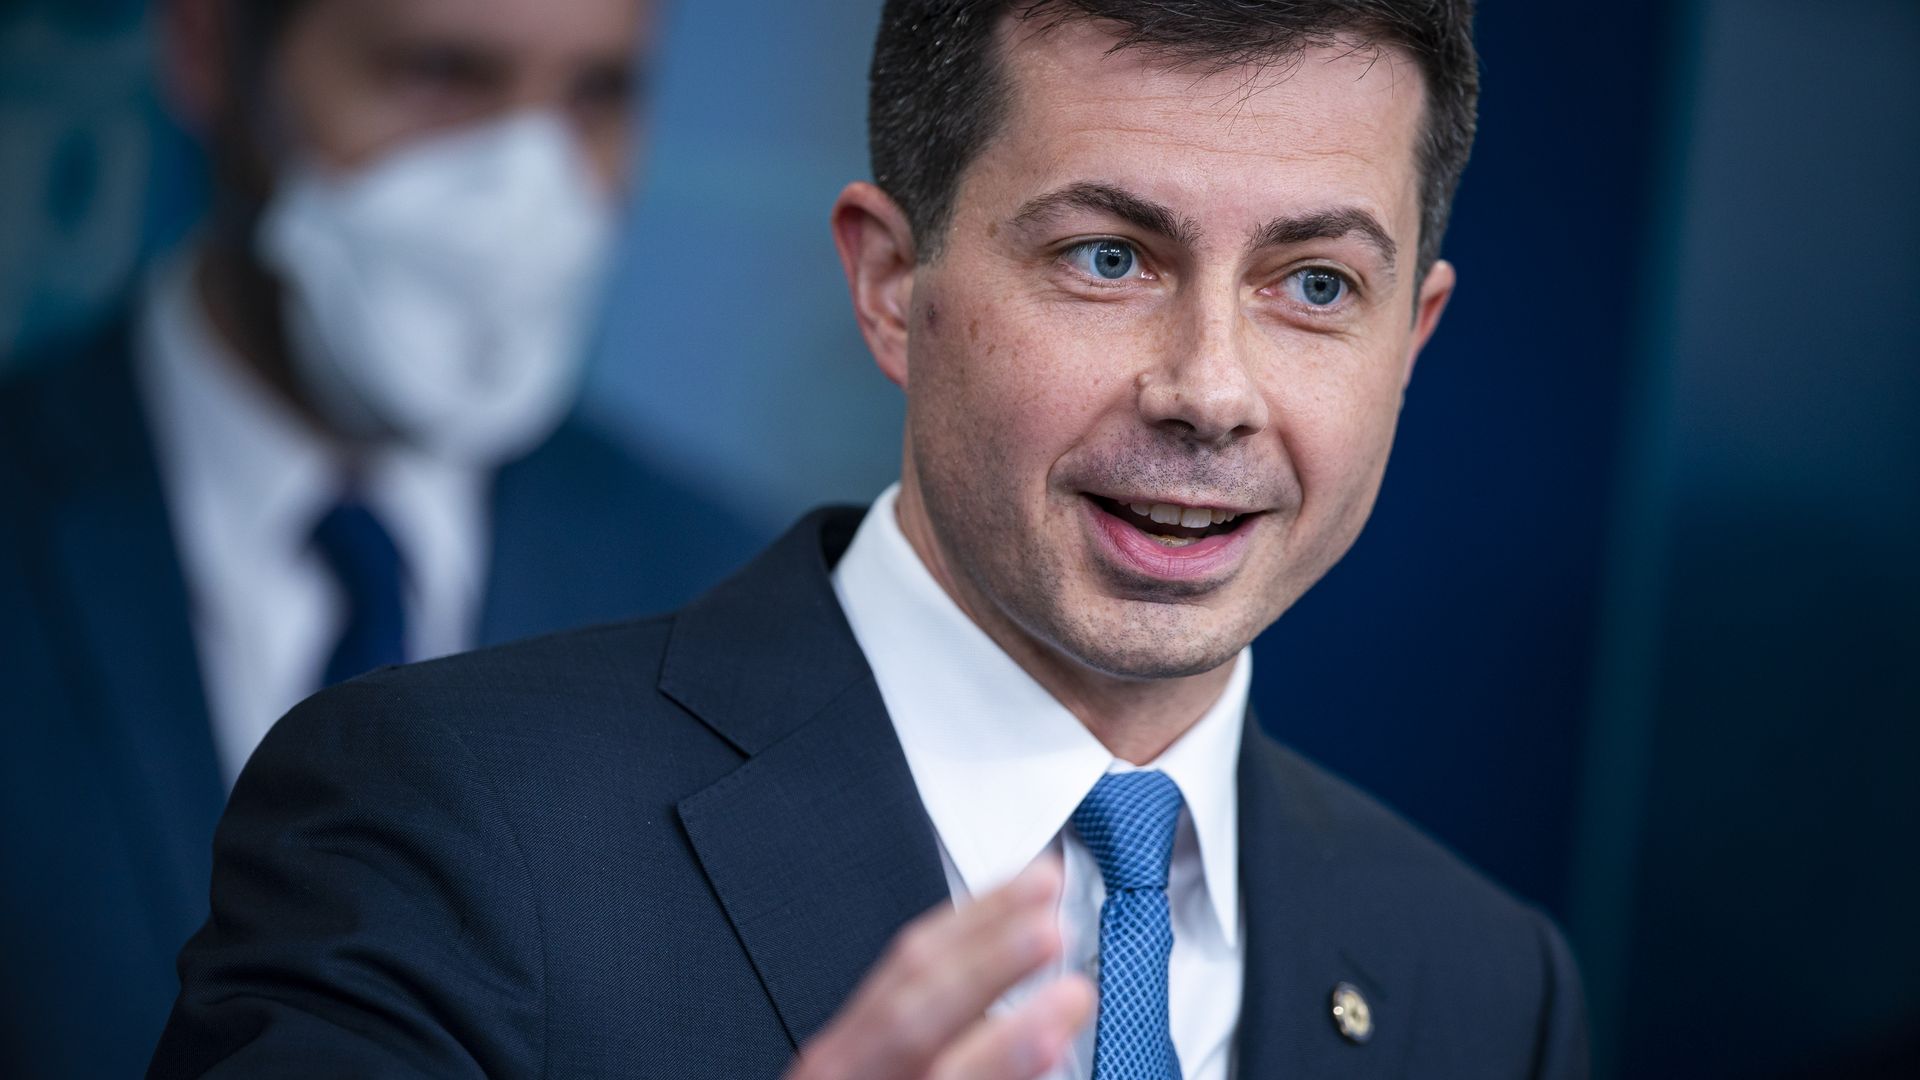 Secretary of Transportation Pete Buttigieg speaking in the White House in May 2022.